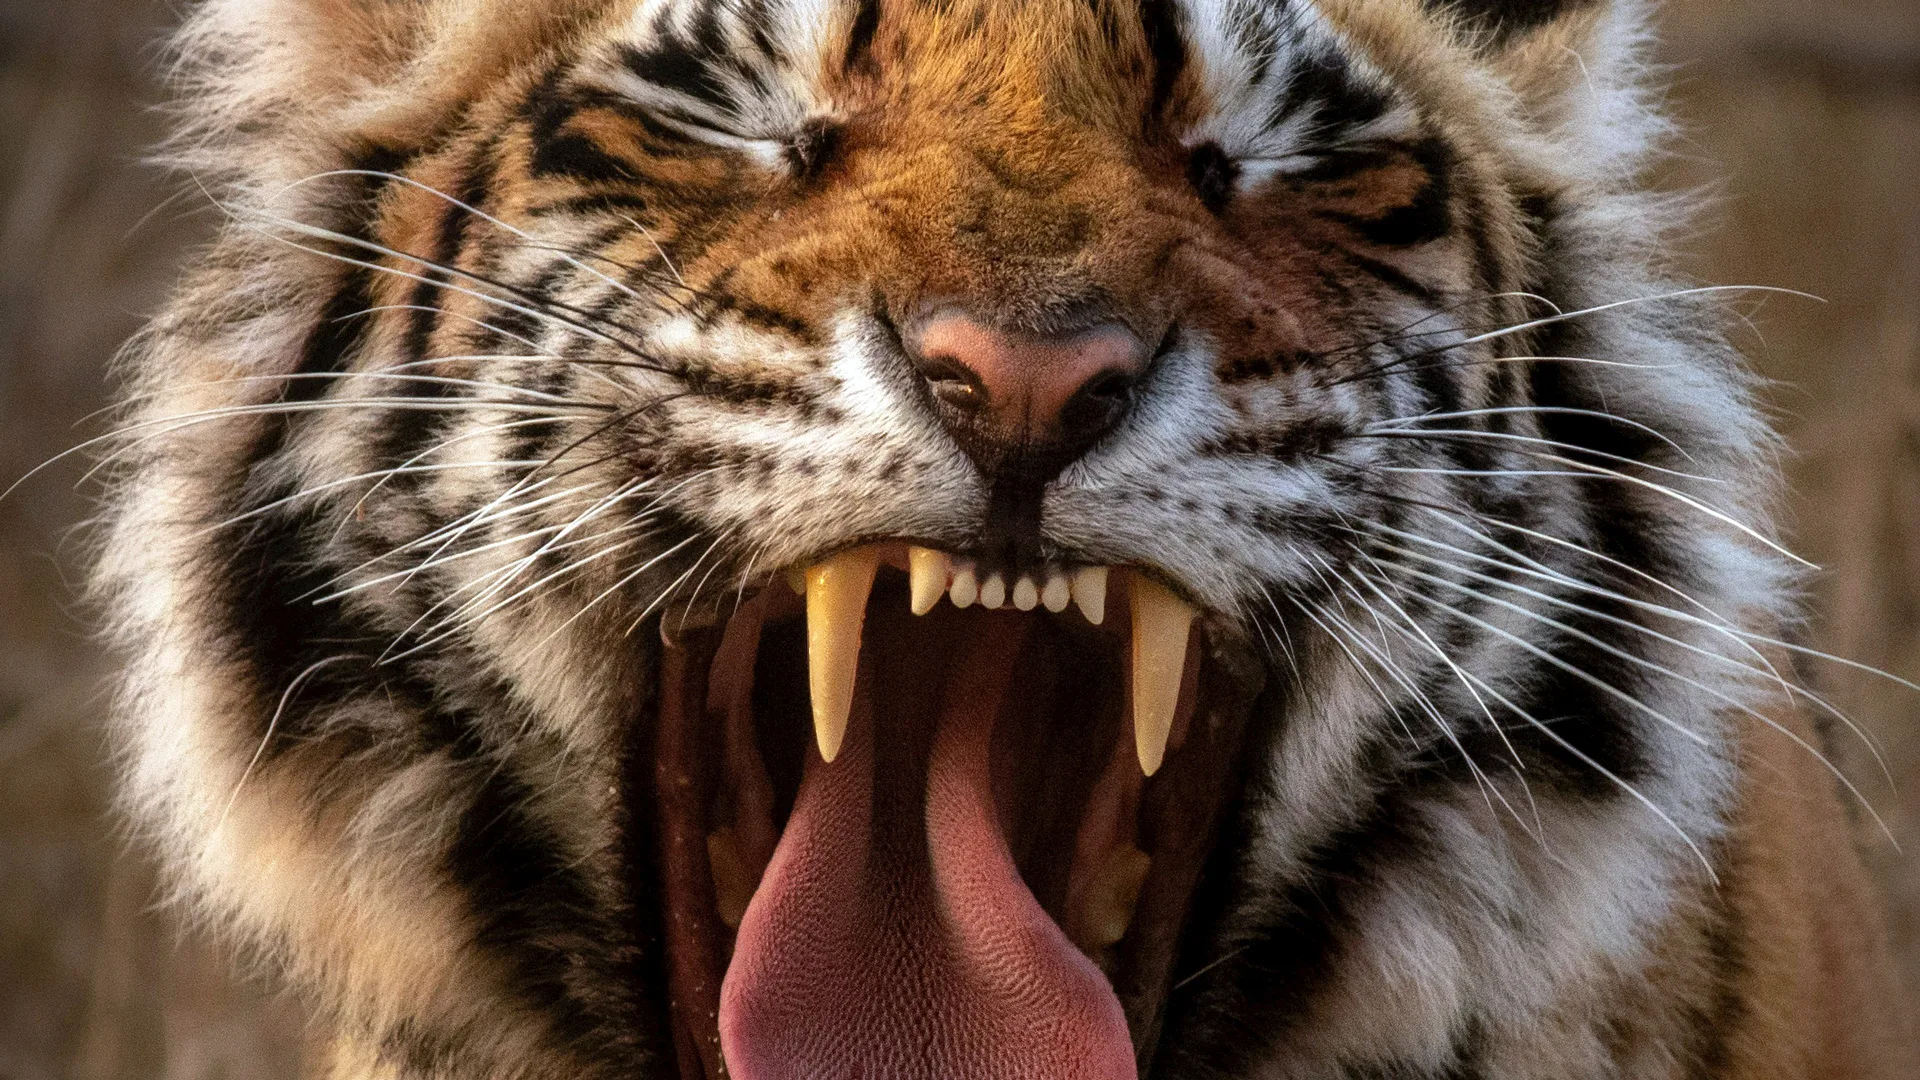 Photograph of a tiger with it's mouth open and eyes closed